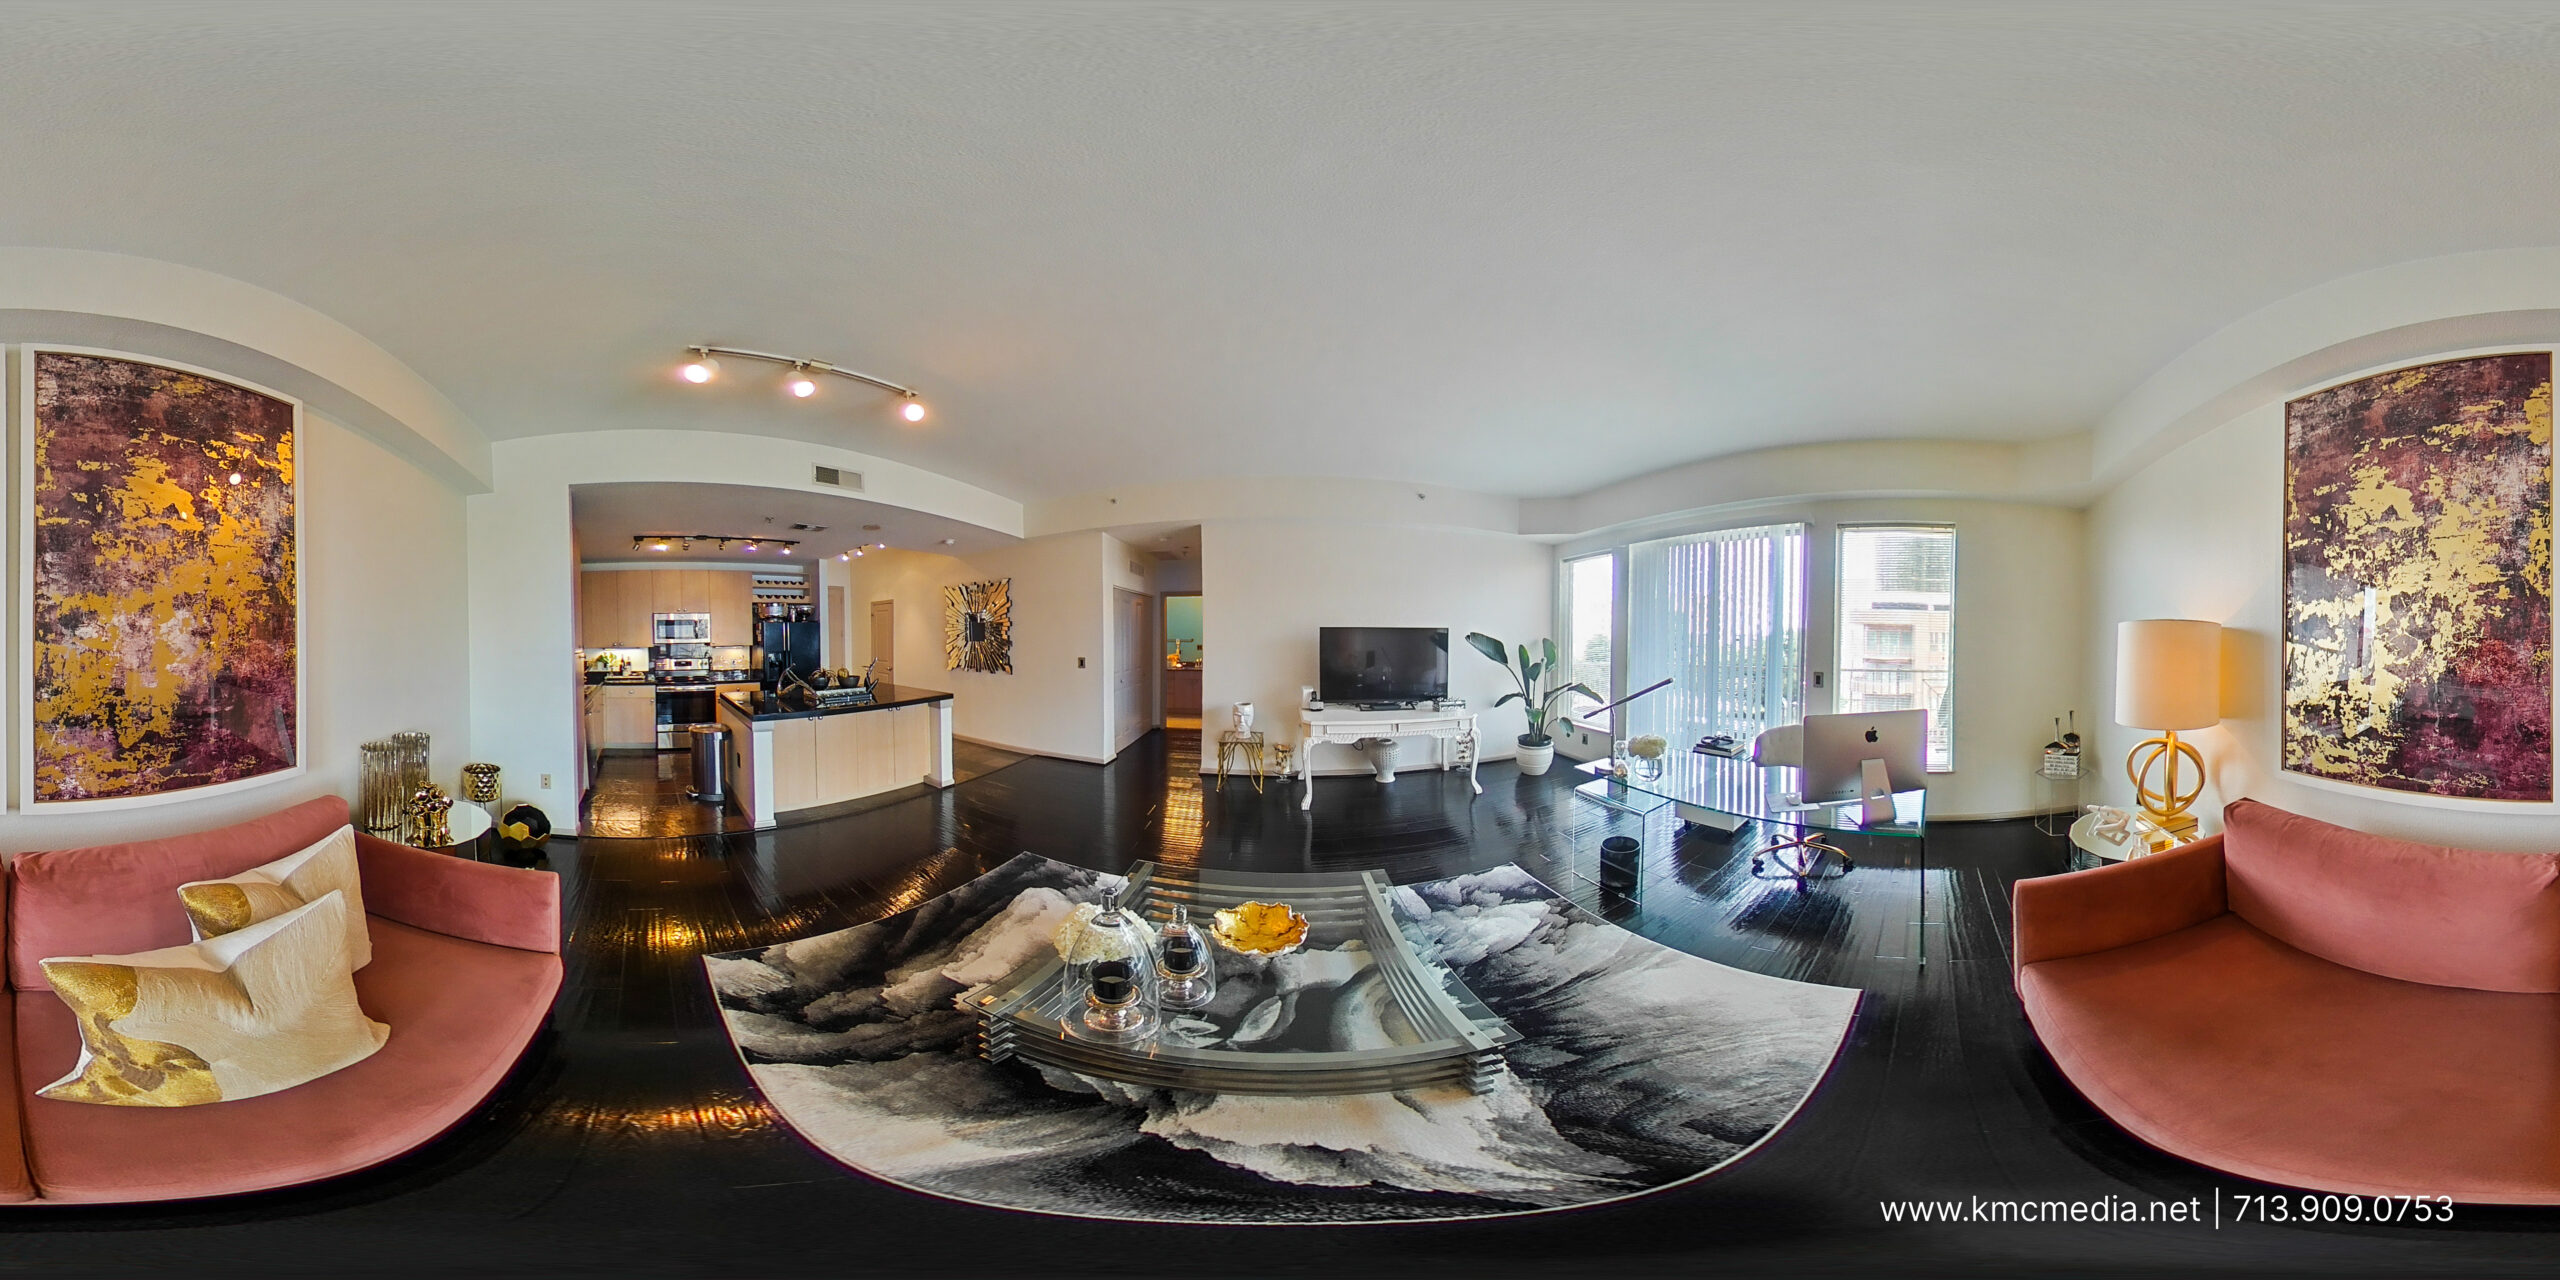 Real estate photography 360° panorama of residential home’s living room area fully interior designed.